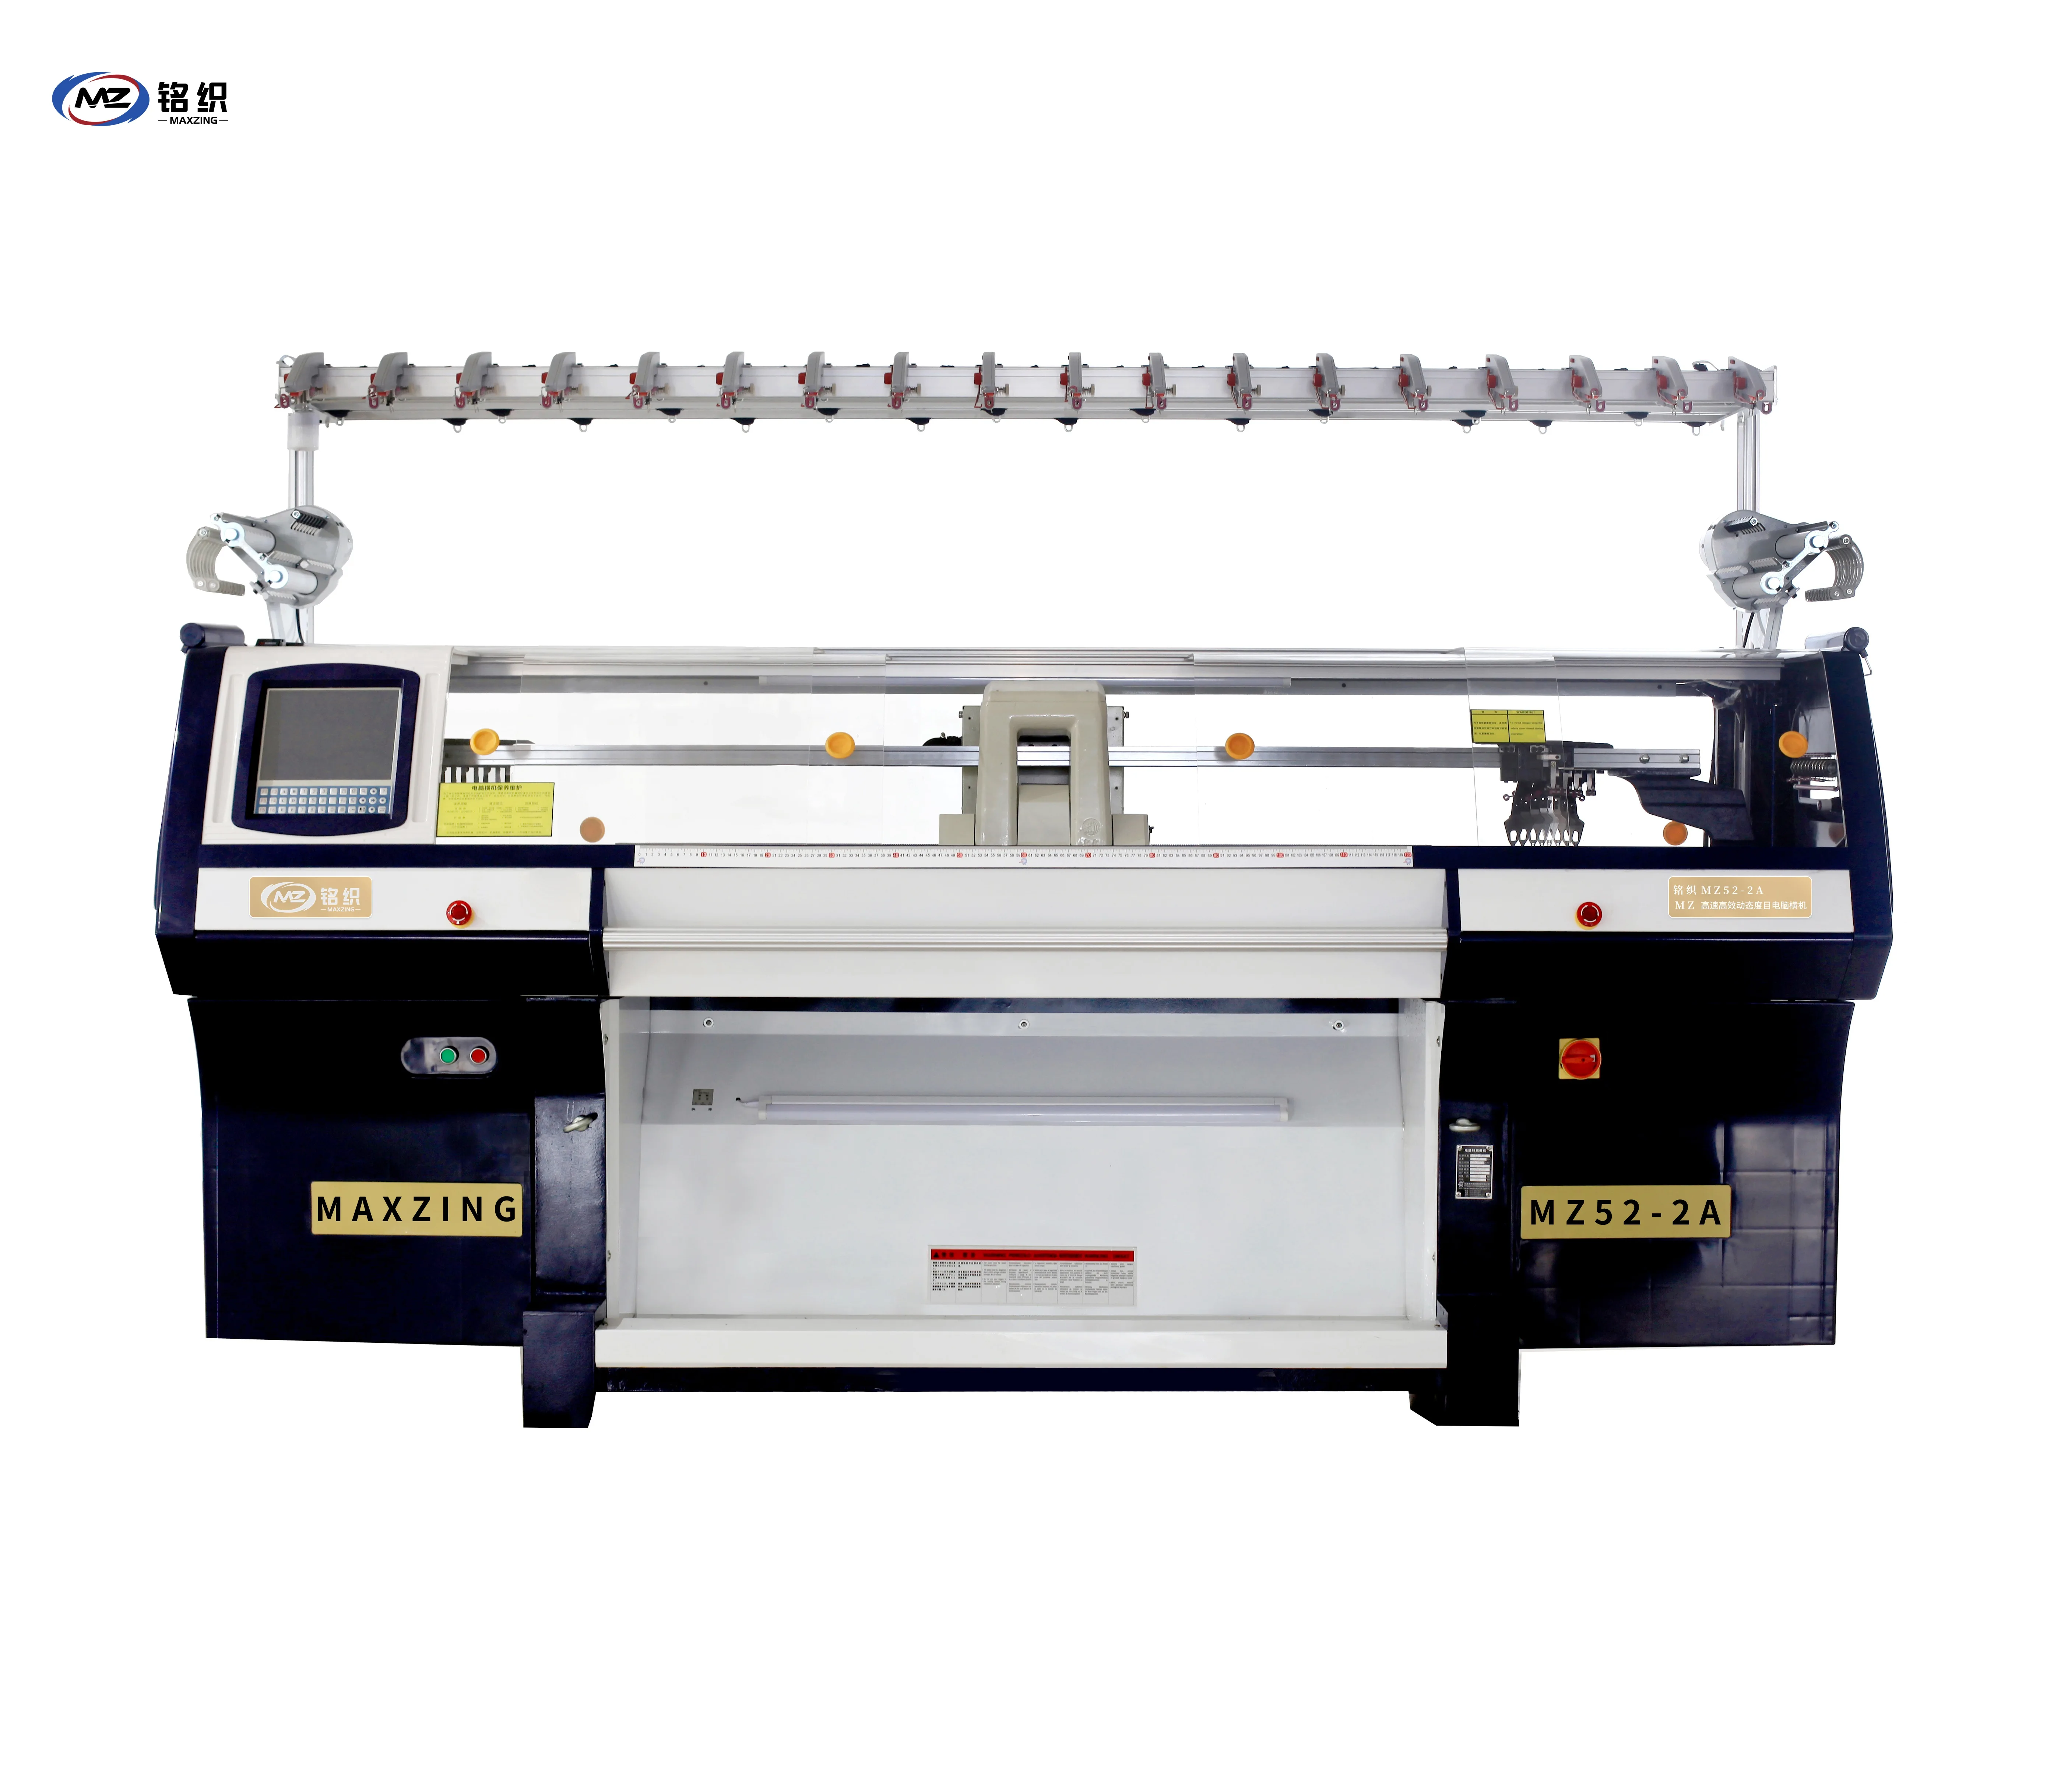 V-52S-2 Fully automatic computer knitting flat knitting machine from China  Manufacturer - VMA SEWING MACHINE